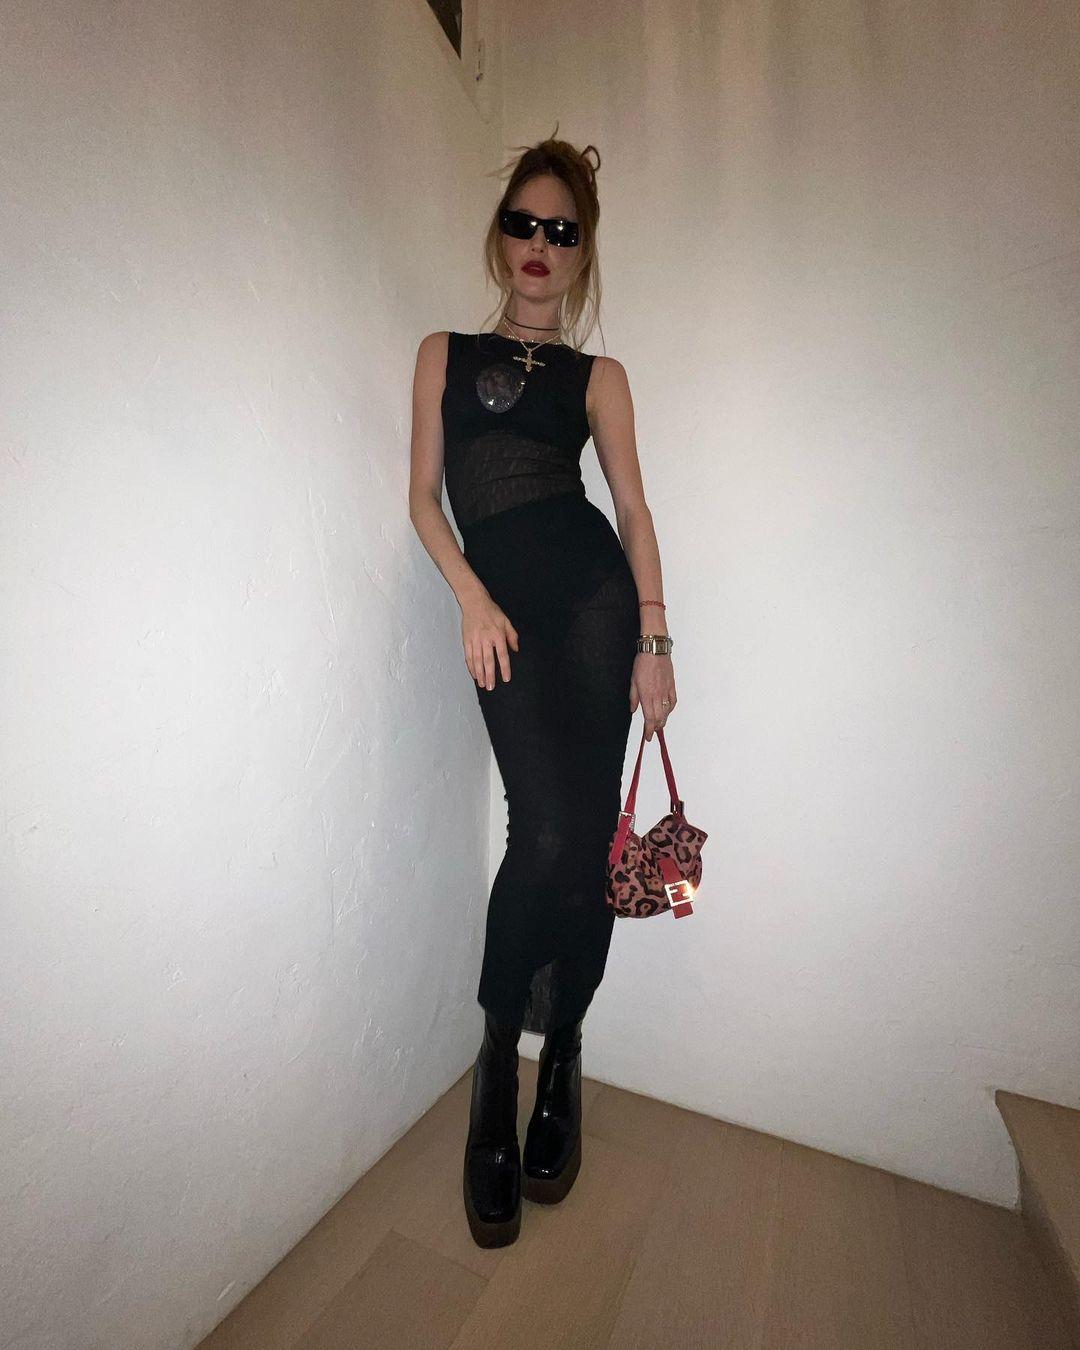 Behati Prinsloo Flaunts Her Slim Postpartum Body For Valentine's Day Outing